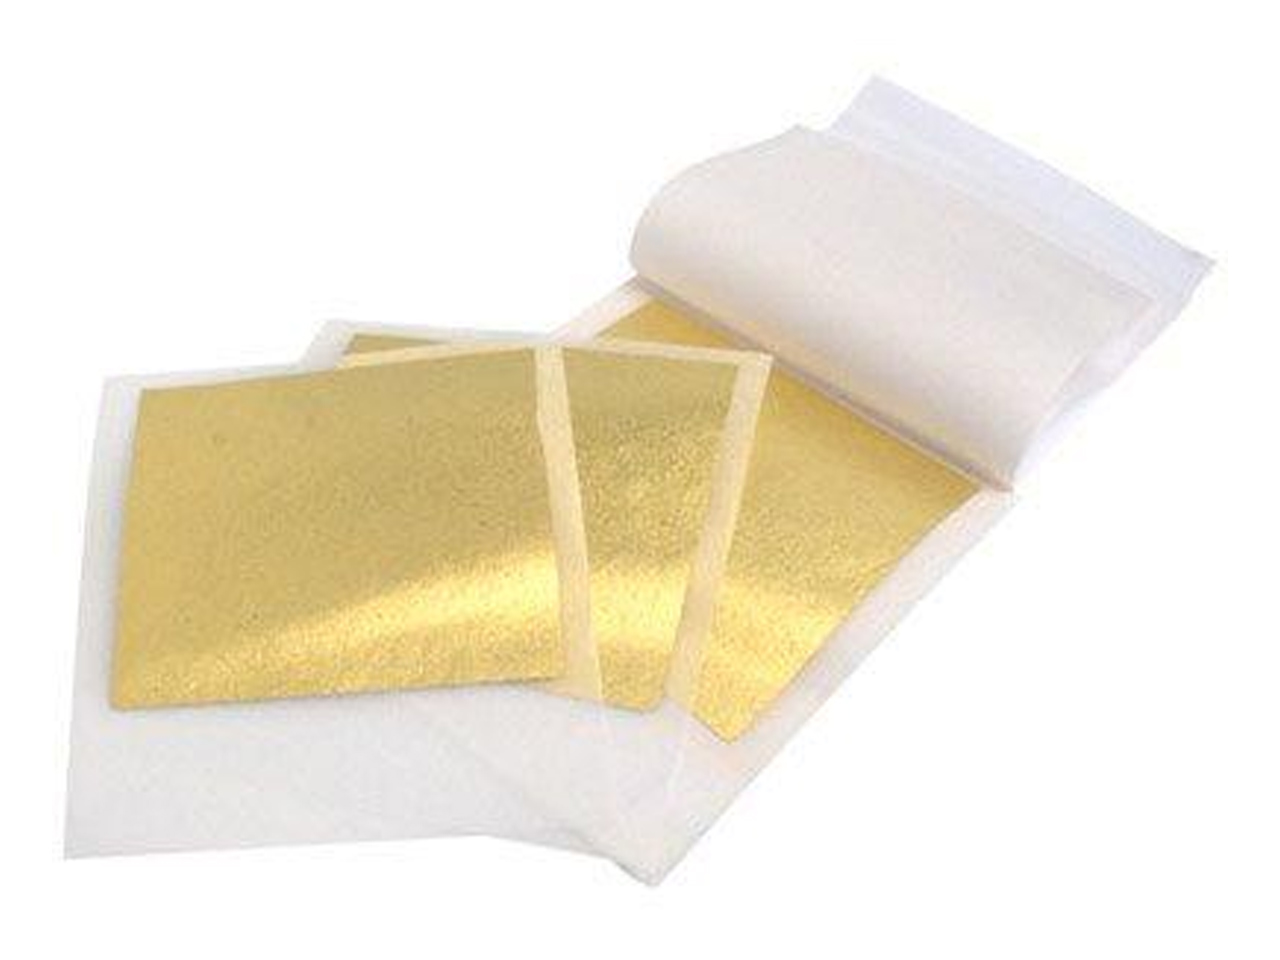 Feuille d'or alimentaire x10 80x80mm